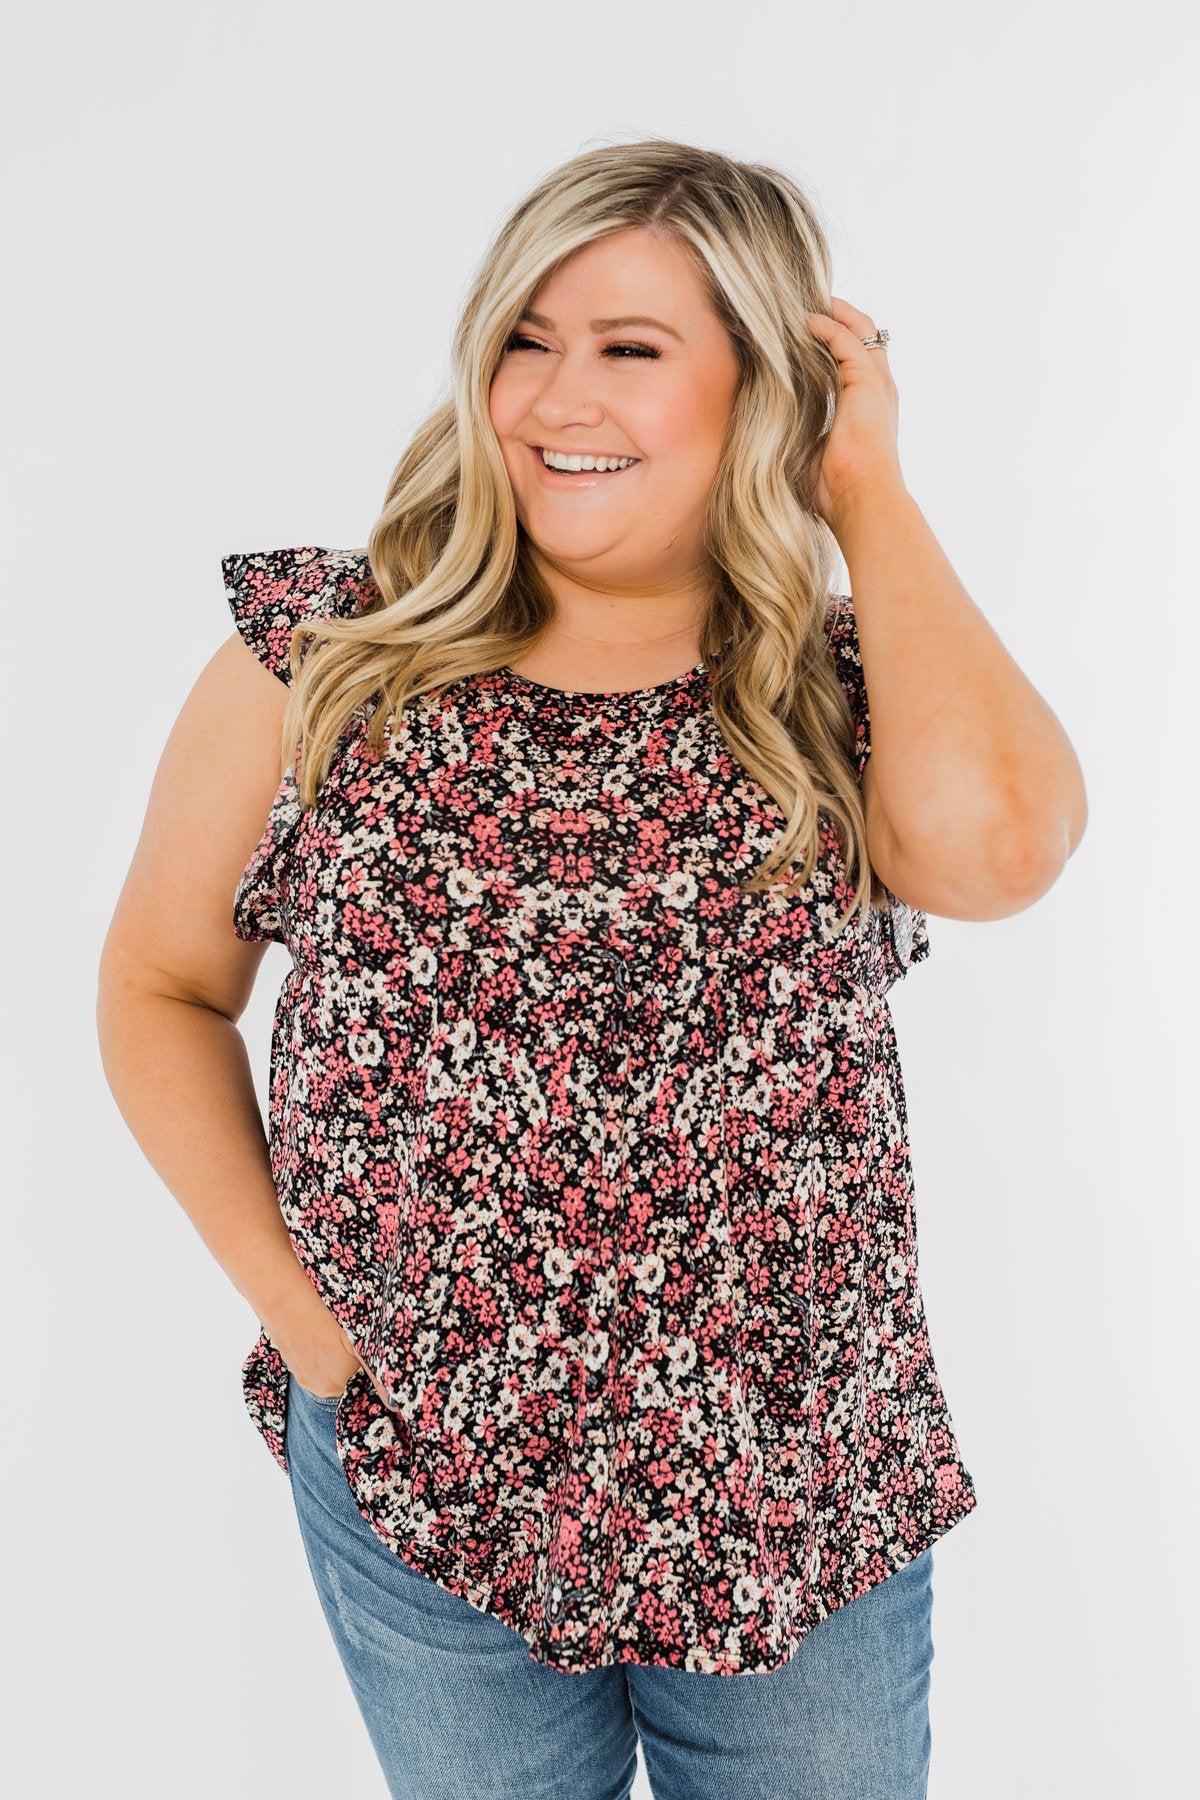 Chase Your Dreams Floral Ruffle Top- Black & Pink